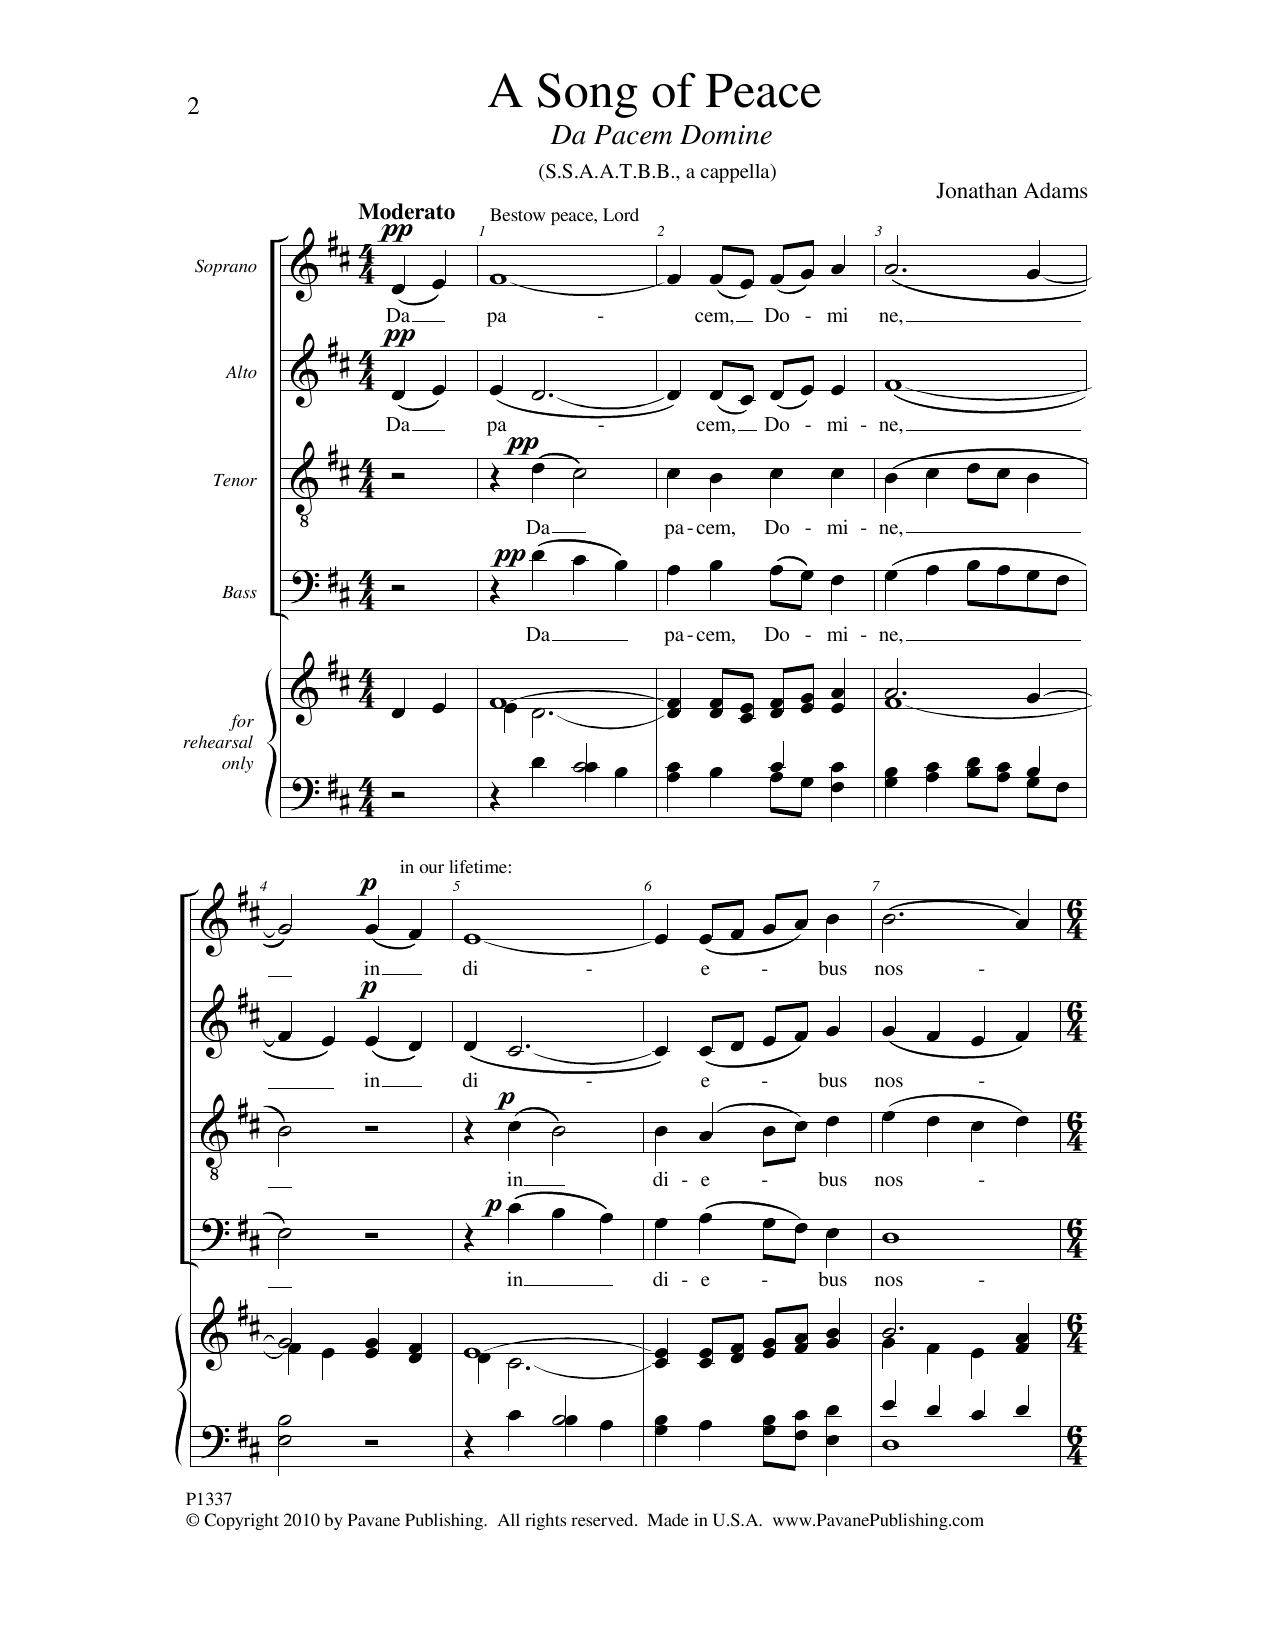 Download Jonathan Adams A Song Of Peace (Da Pacem Domine) Sheet Music